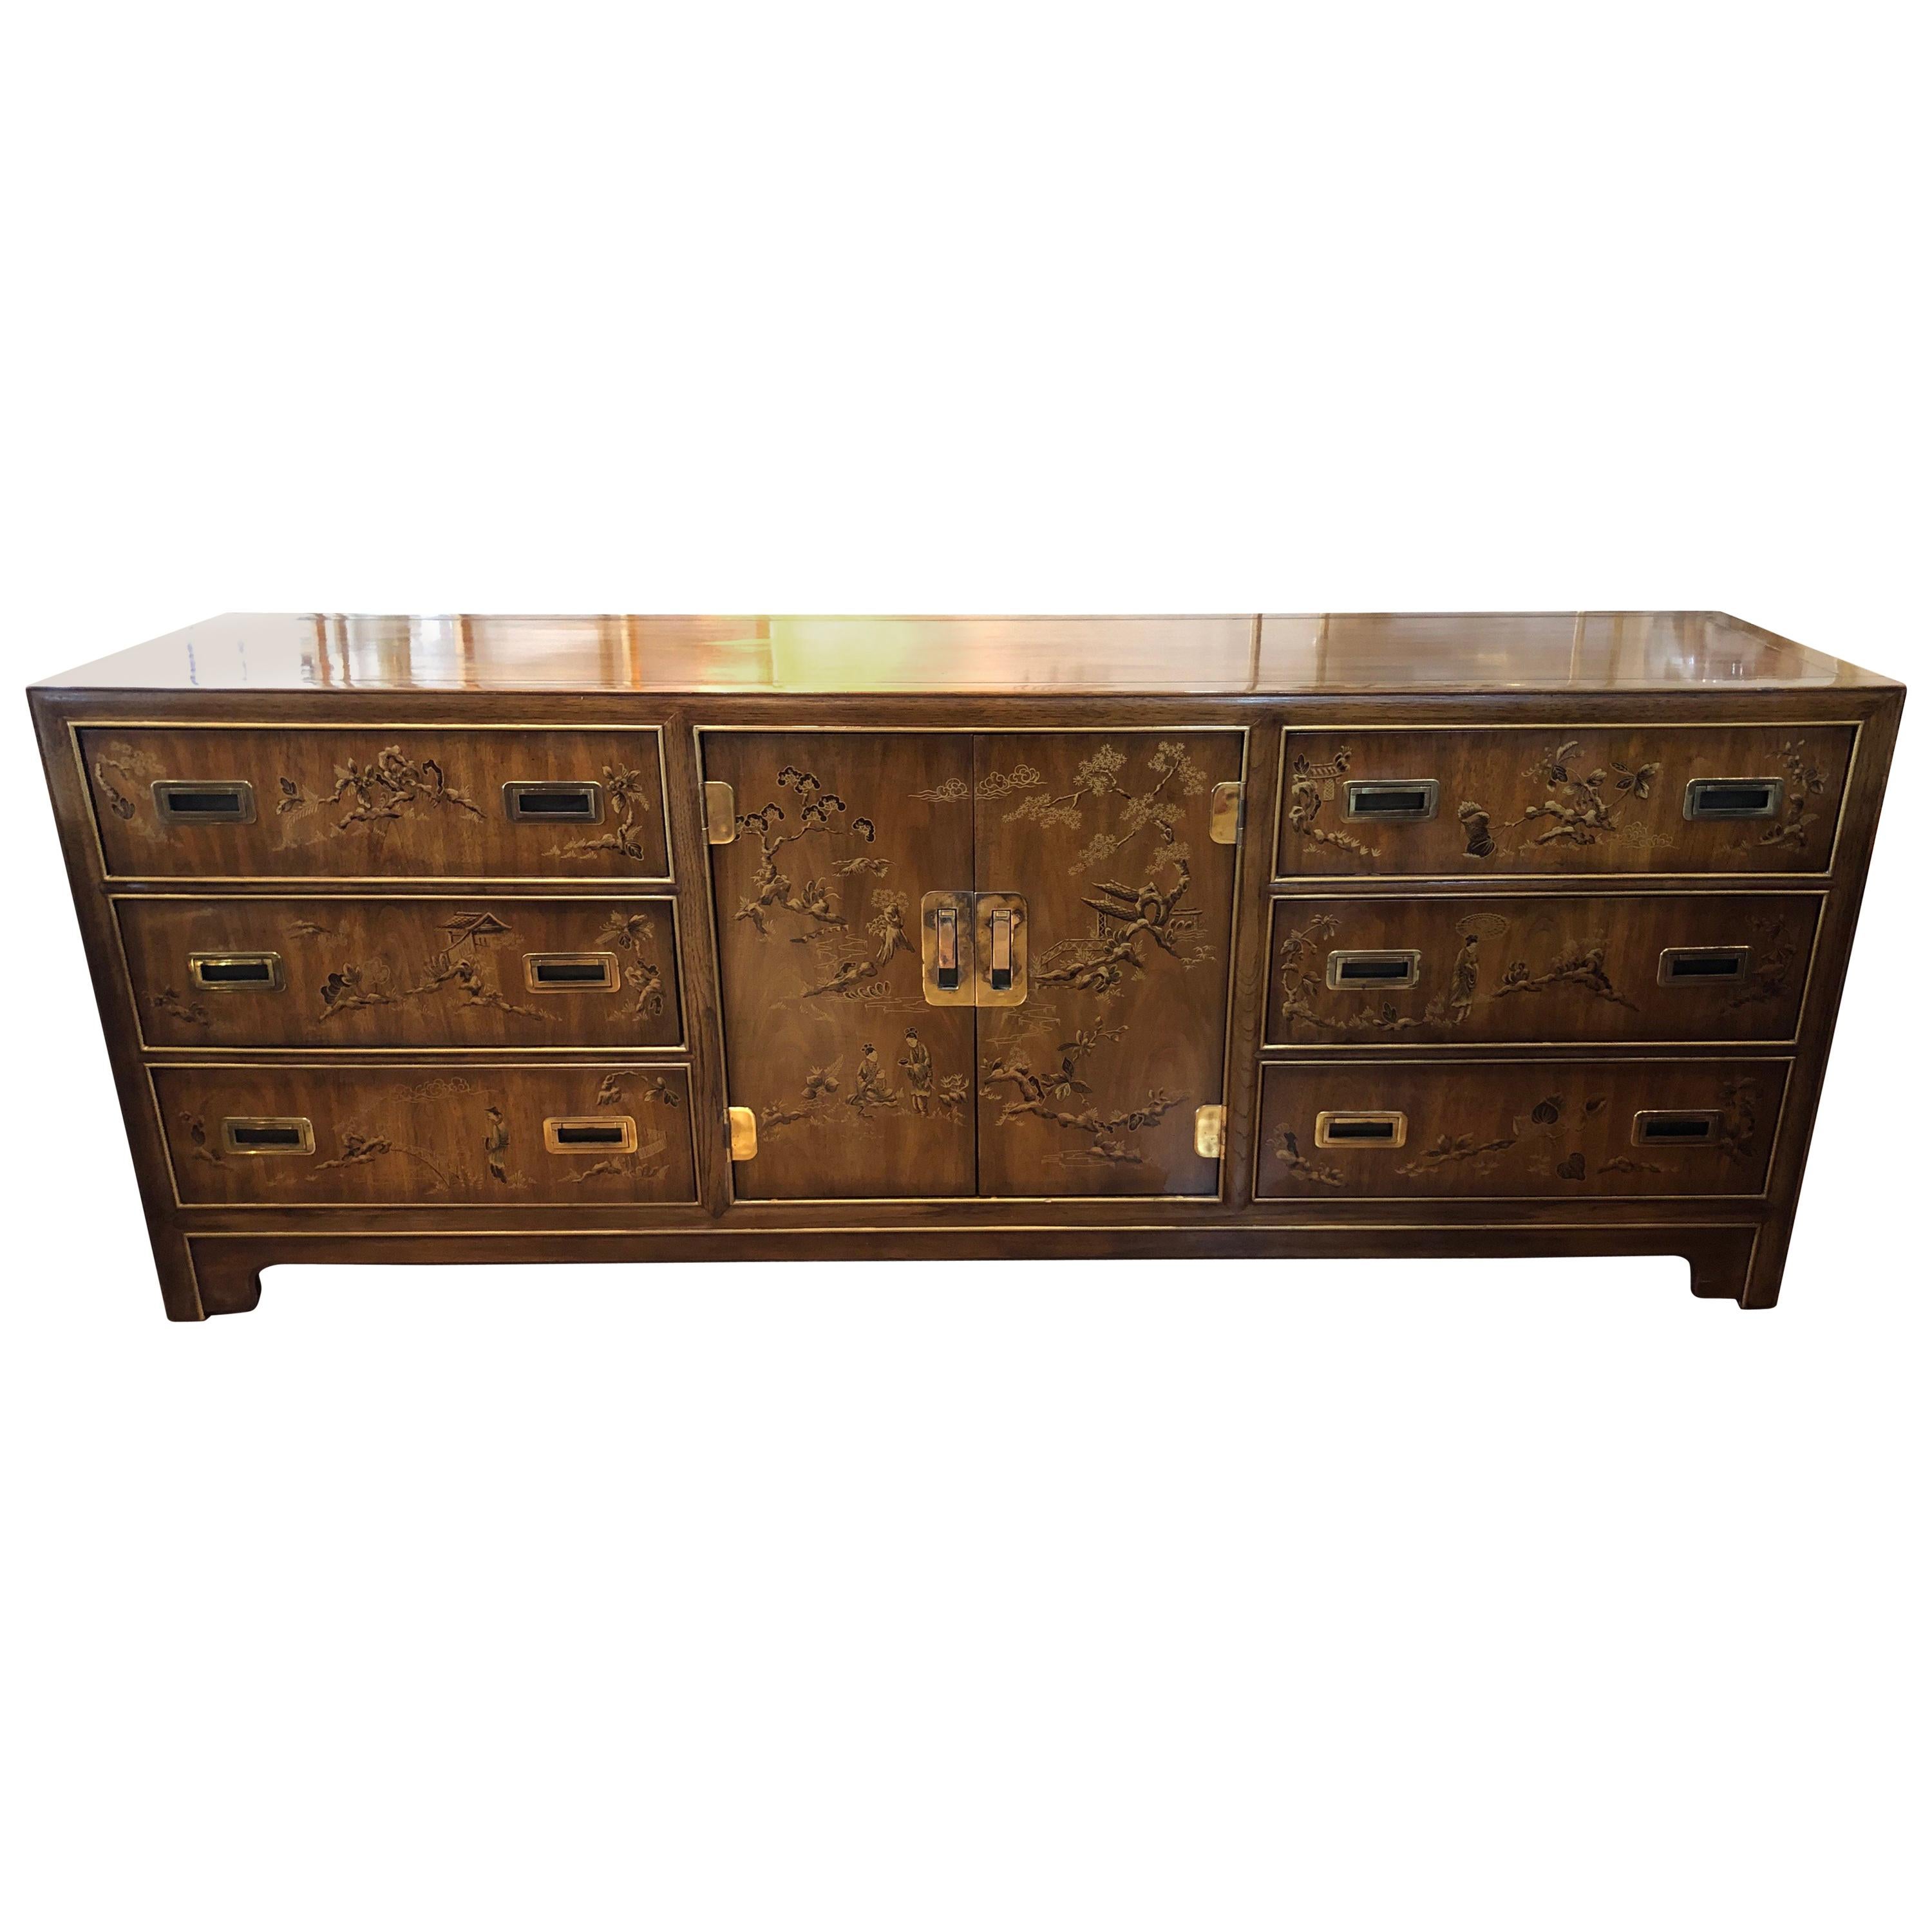 Asian Chinoiserie "Dynasty" Dresser by Drexel Heritage 